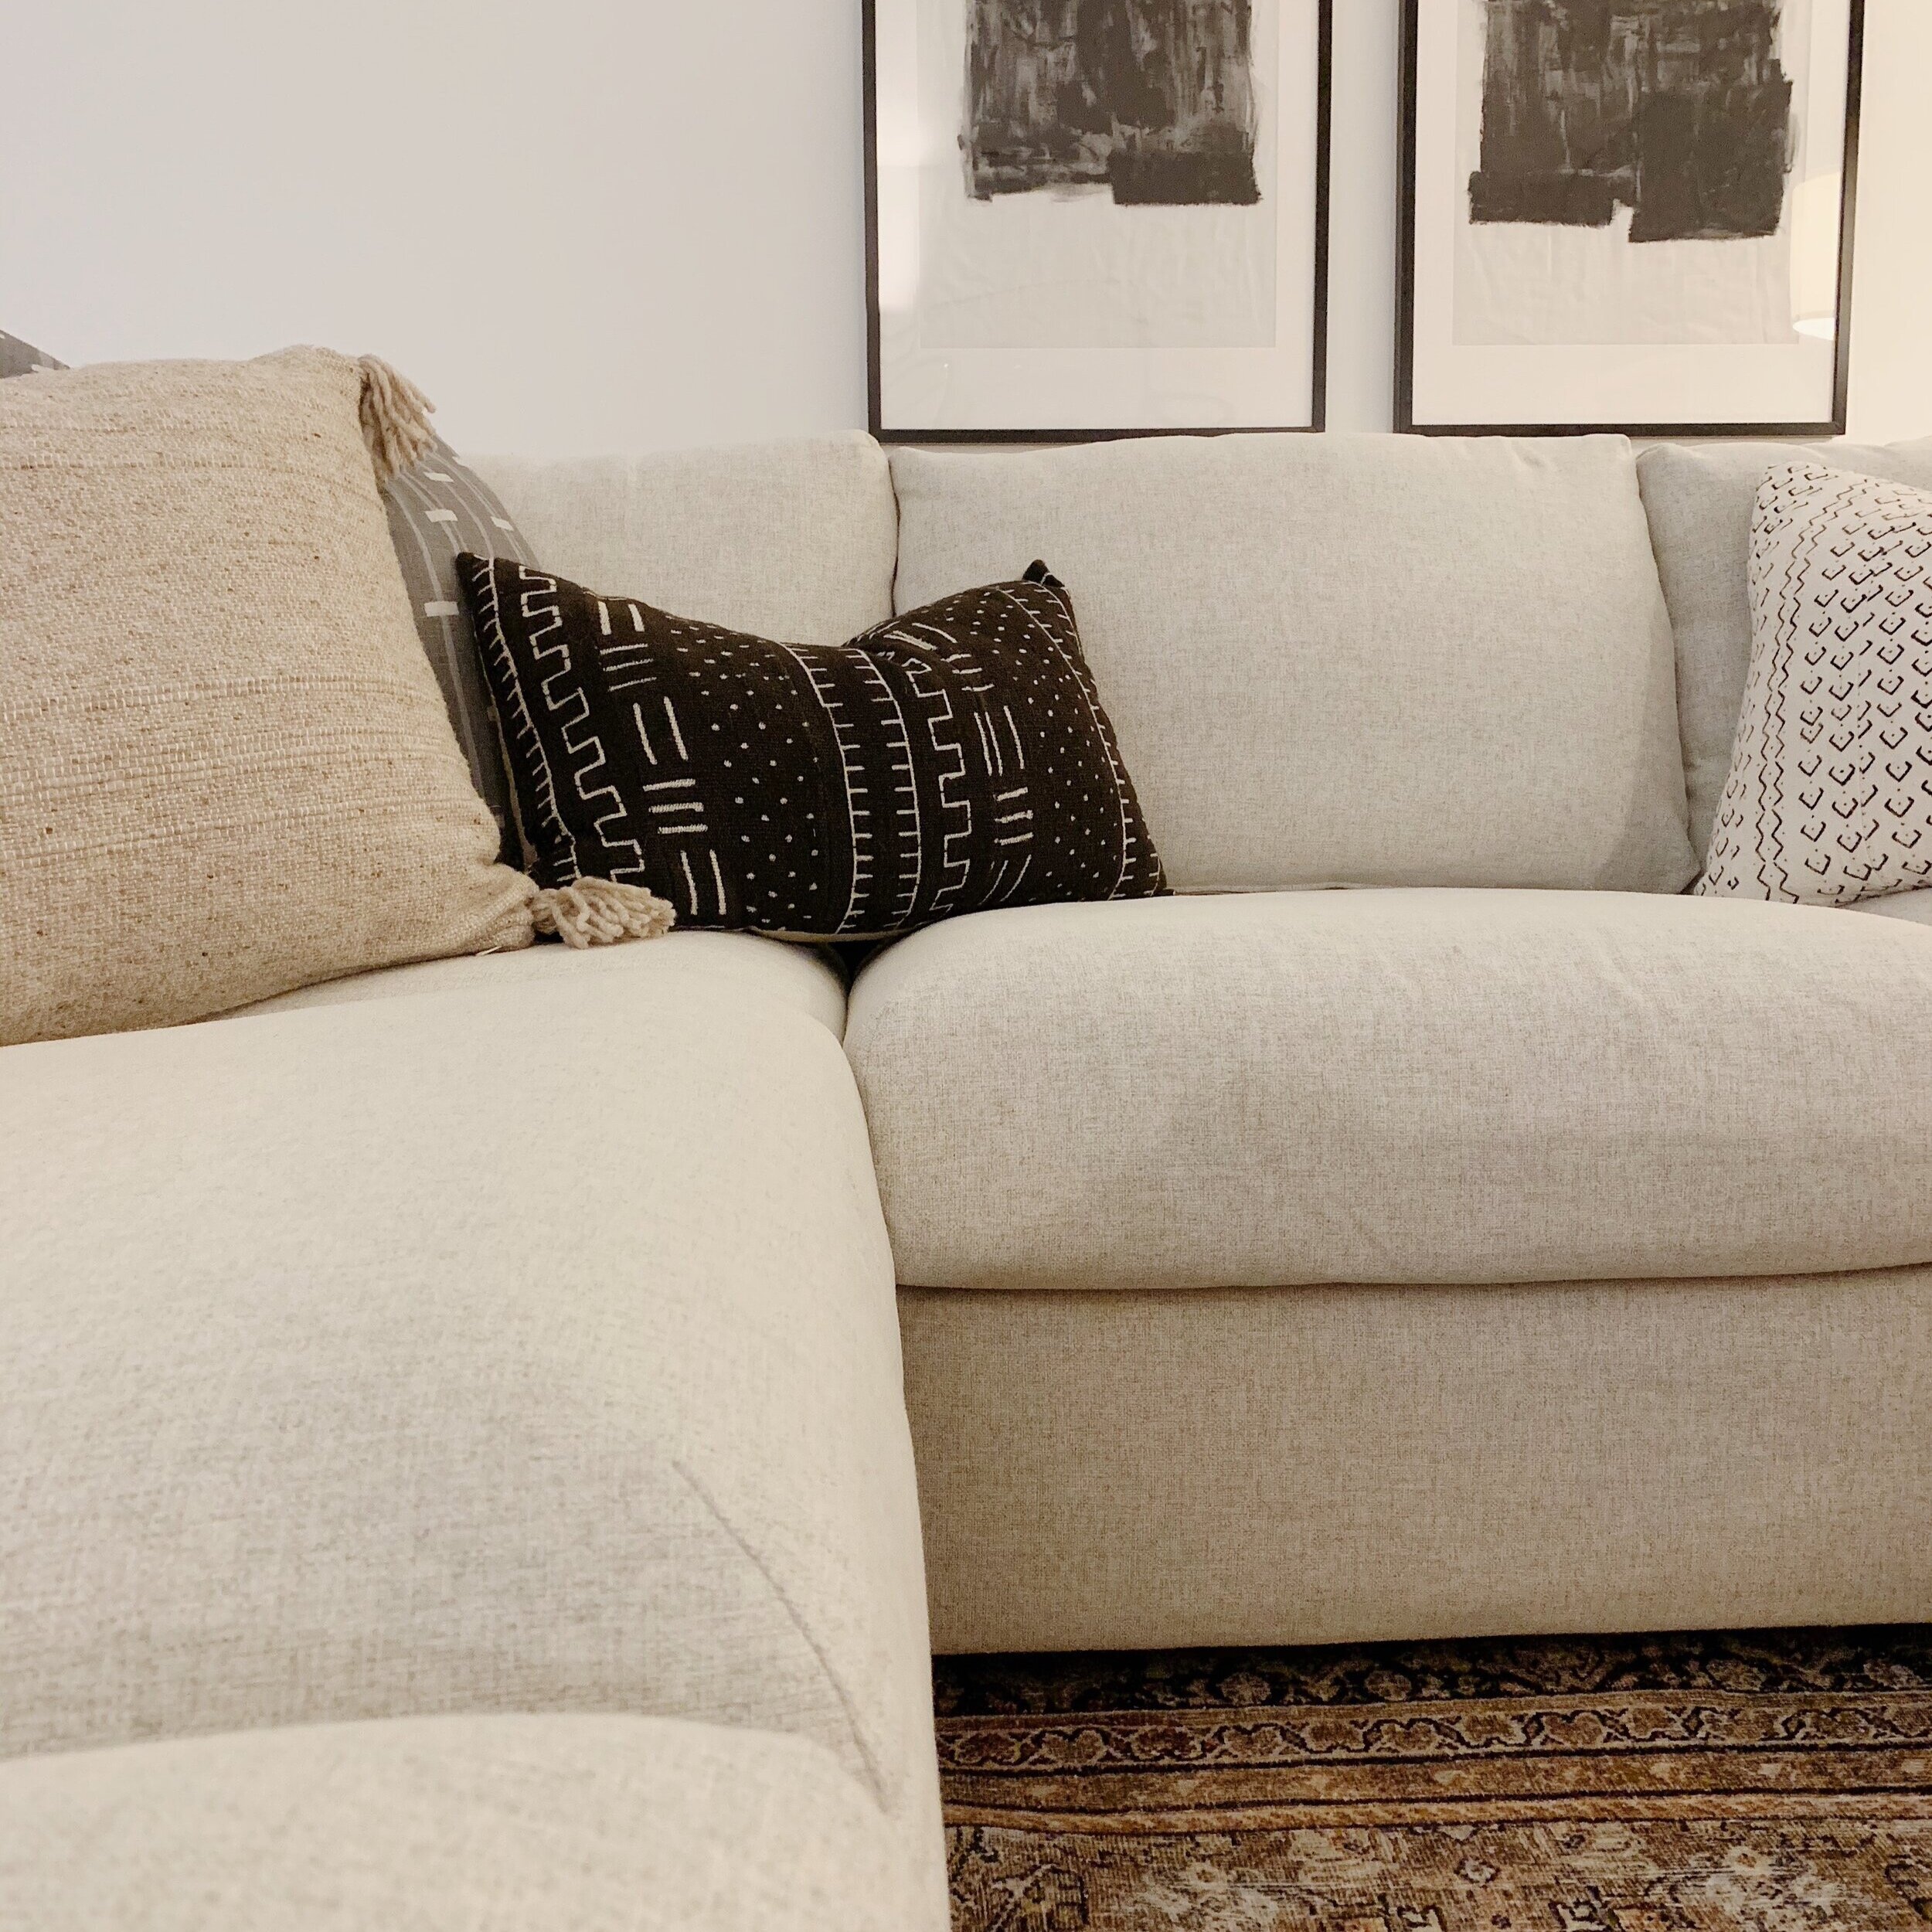 Svig Slud Omgivelser IKEA VIMLE Sectional Sofa Review — My Simply Simple